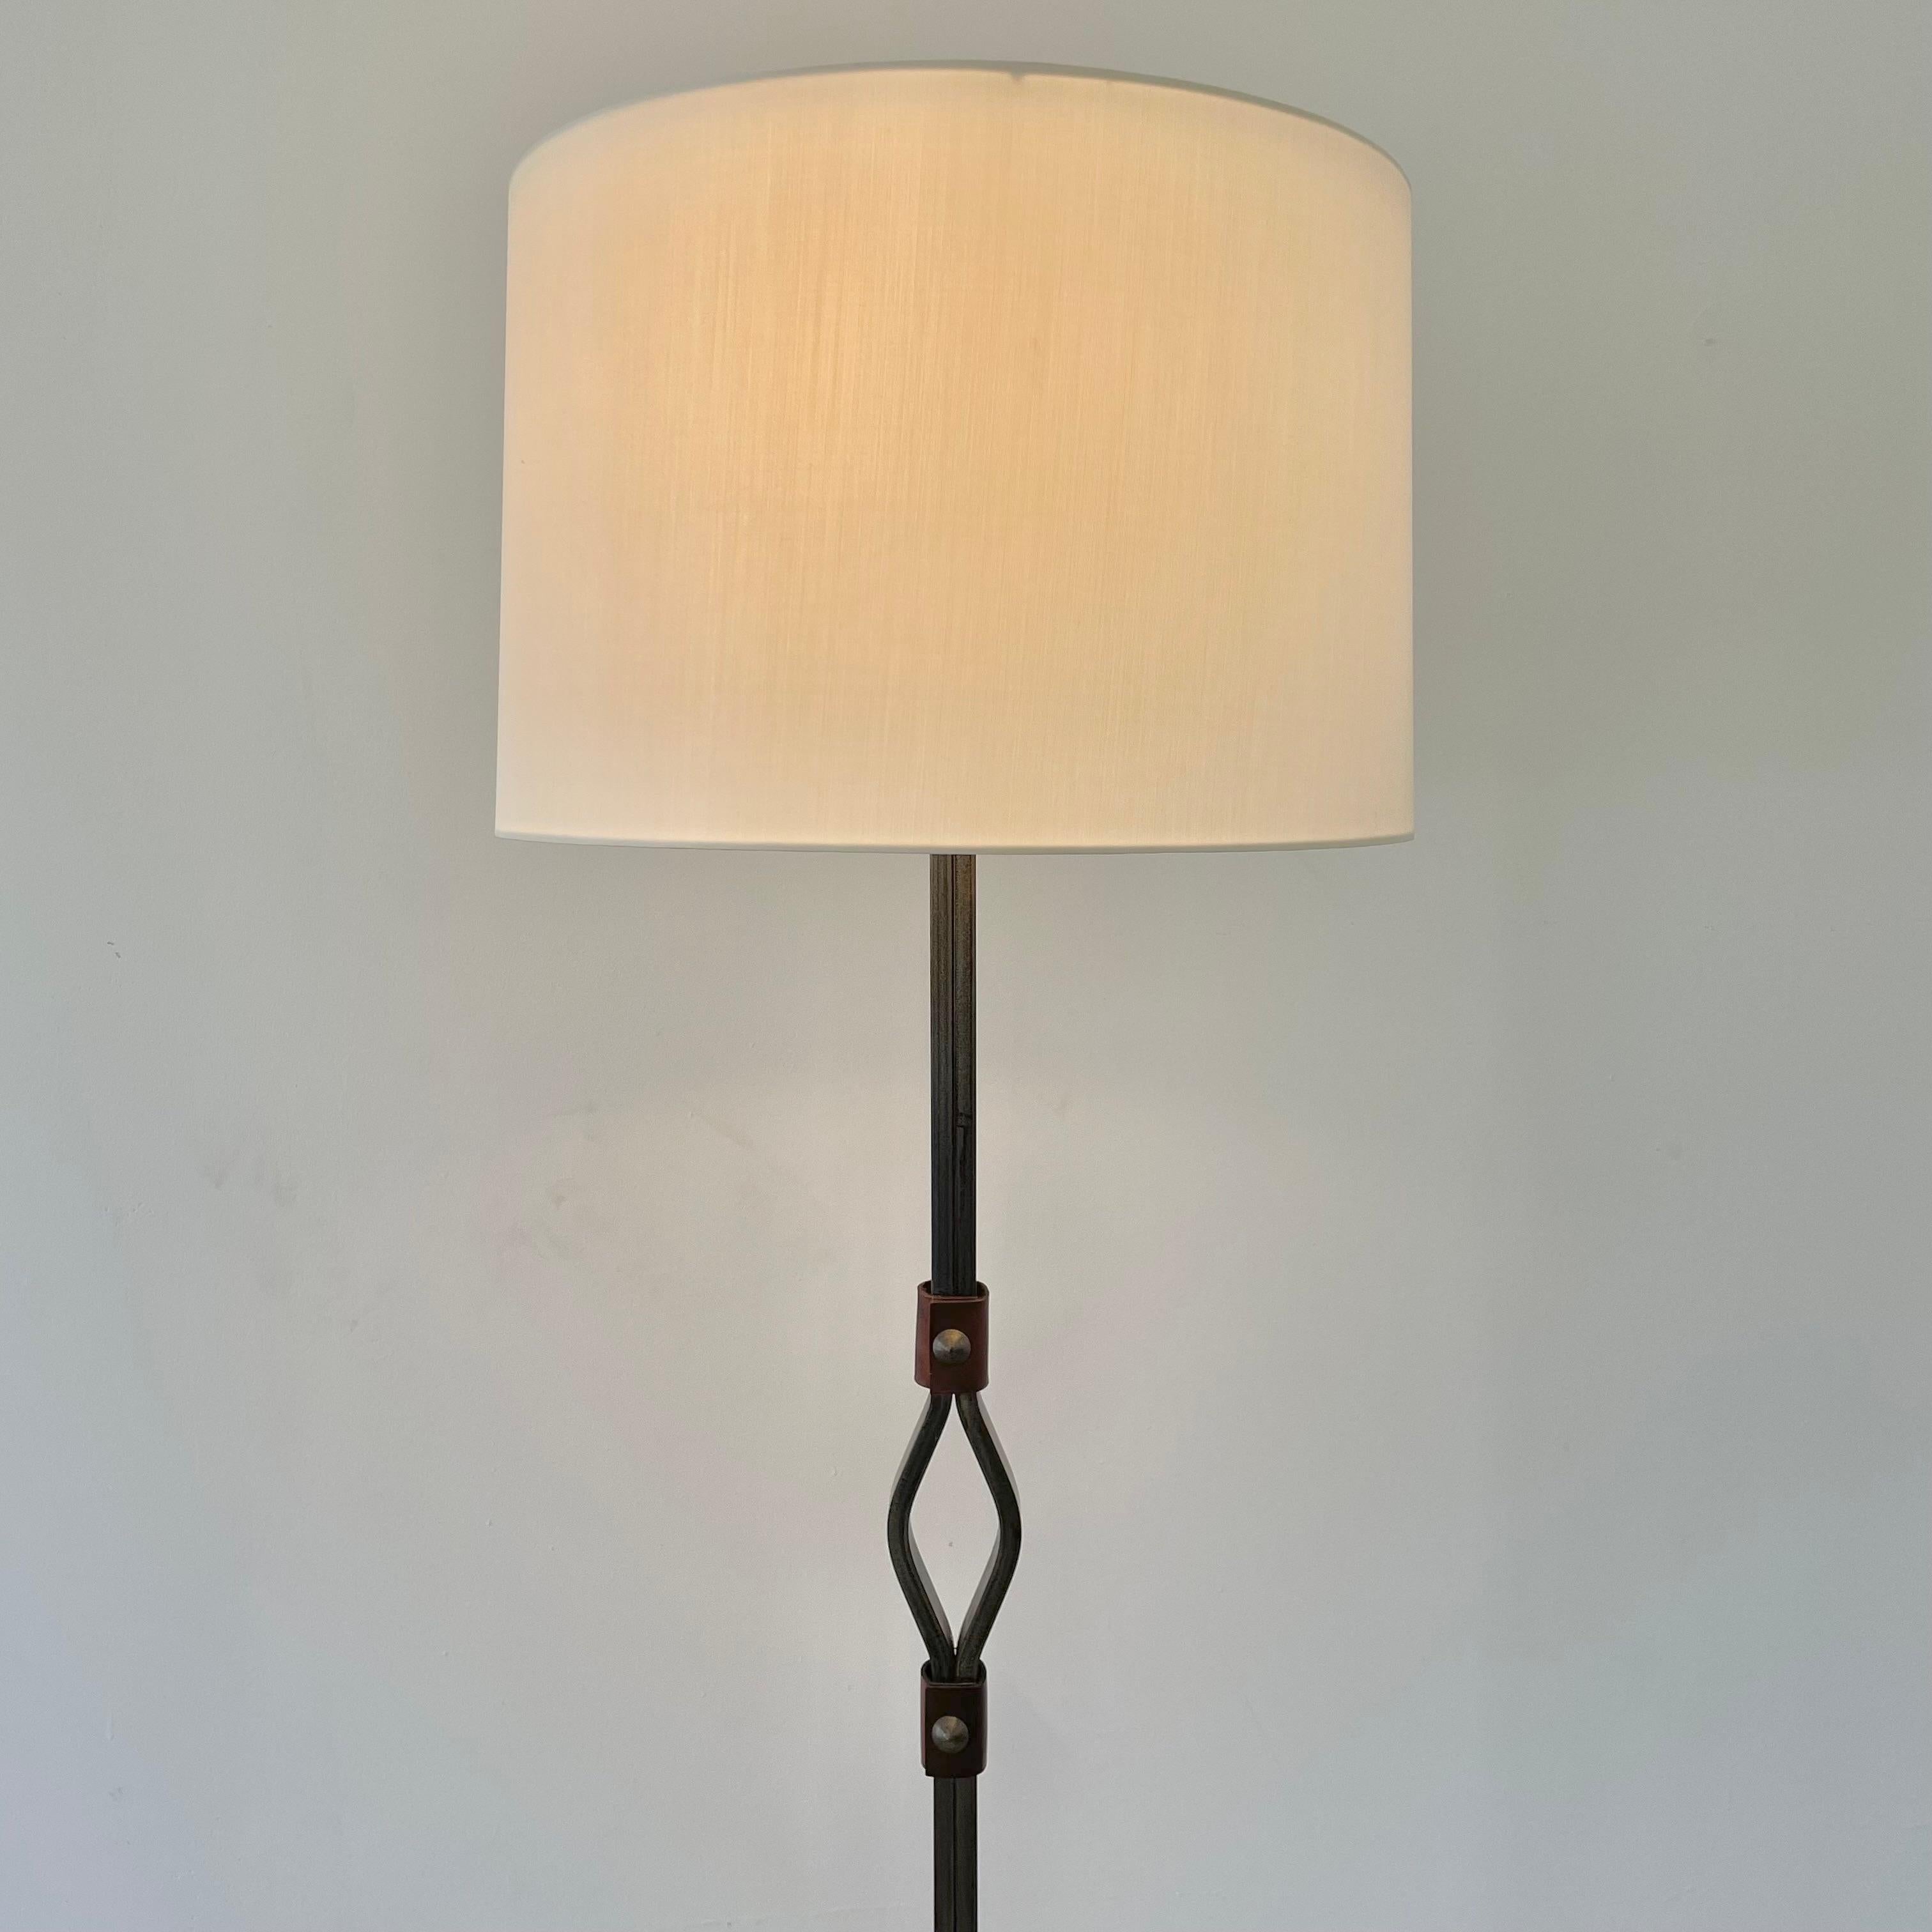 Stunning steel floor lamp by French modernist designer Jacques Adnet. Made in France in the 1950s. Horseshoe shaped base with with thick steel frame. Thick saddle leather accents wrap around the frame in five locations; two at the base, and three